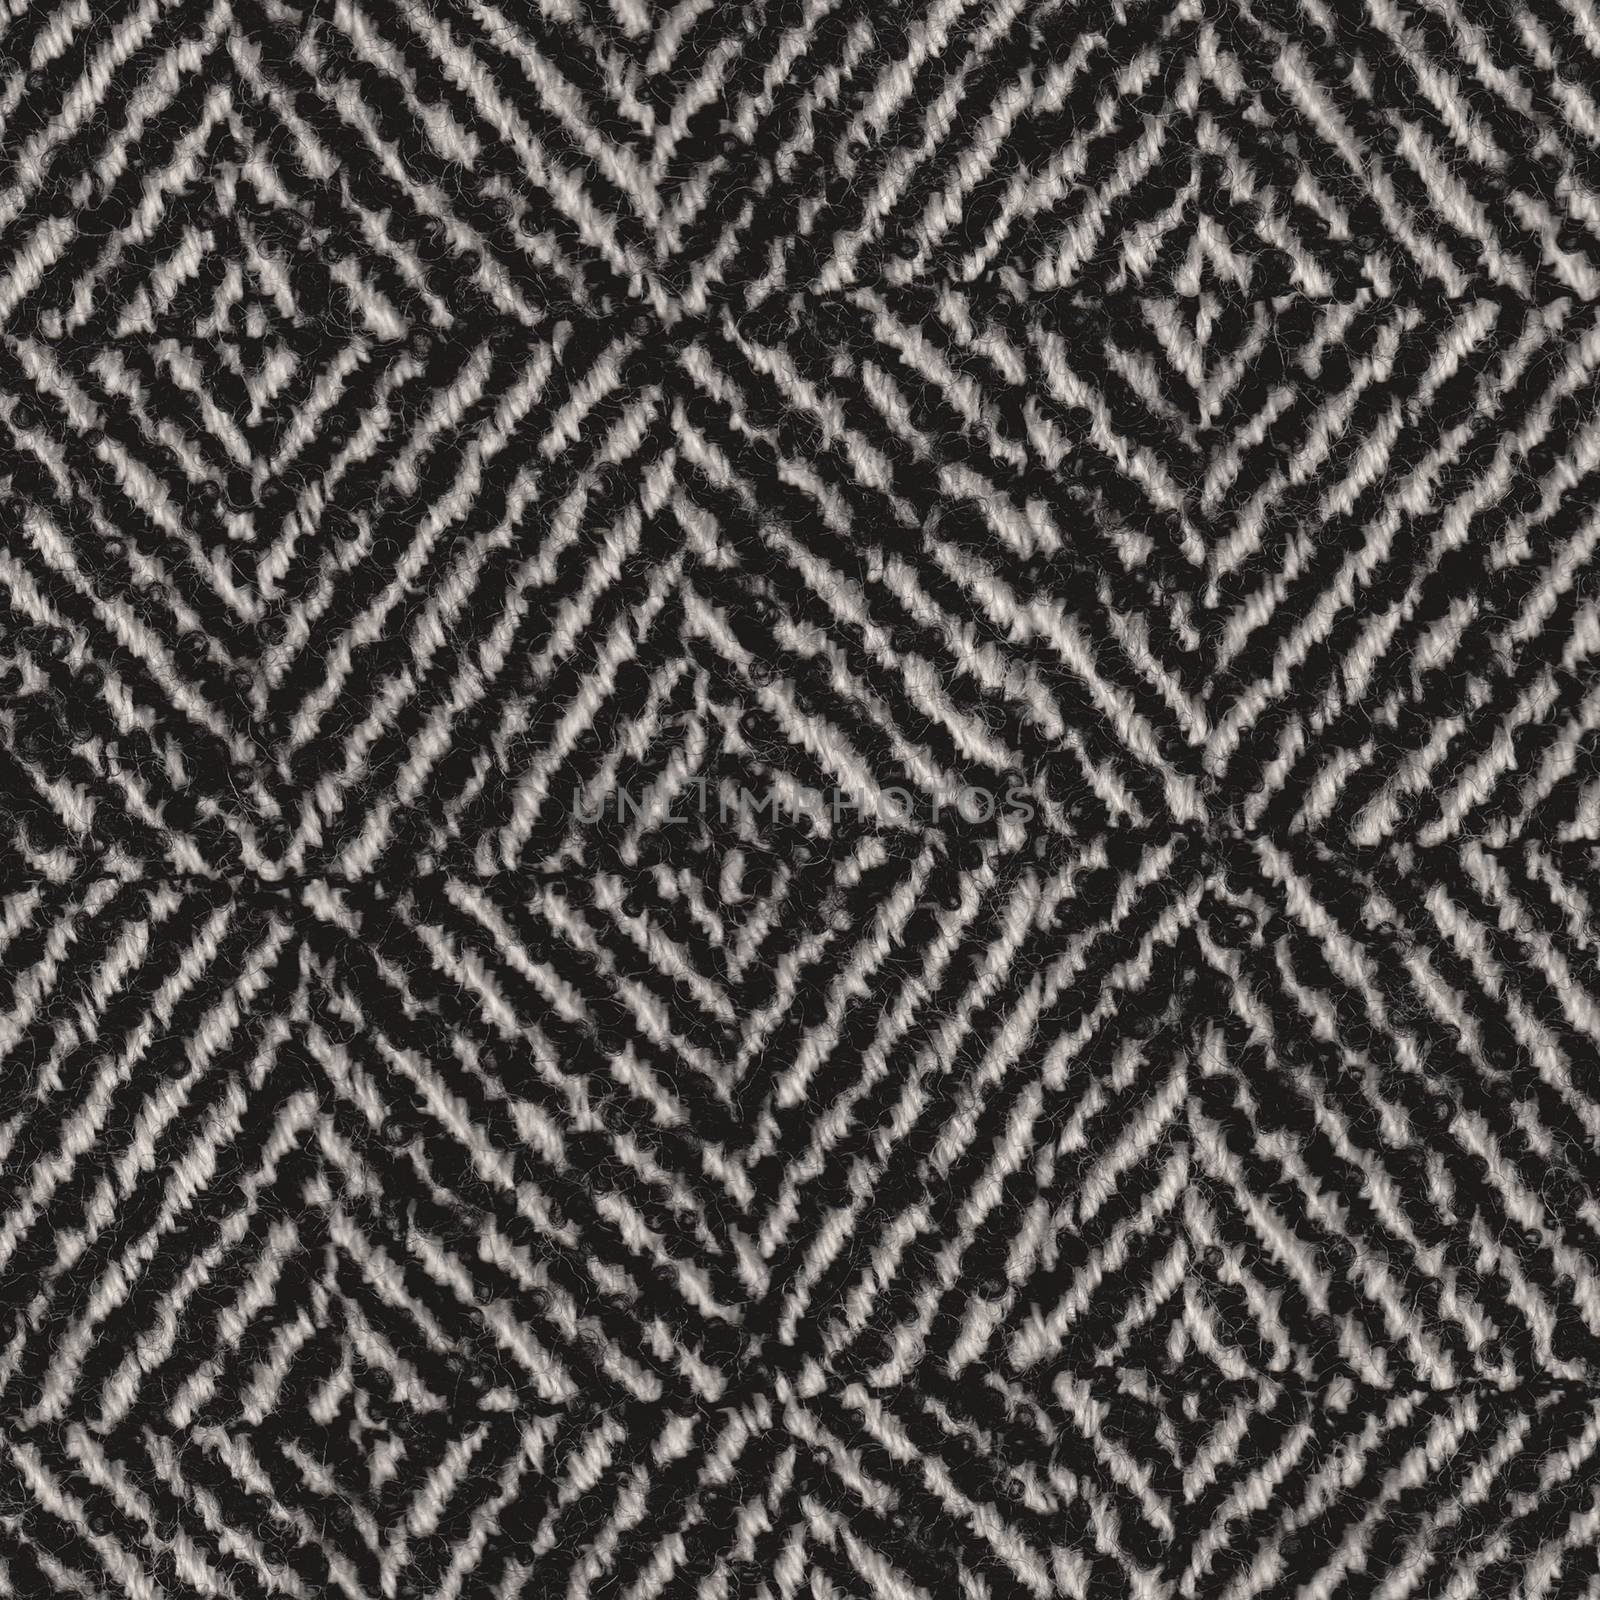 Real close-up wool texture and background, grey color